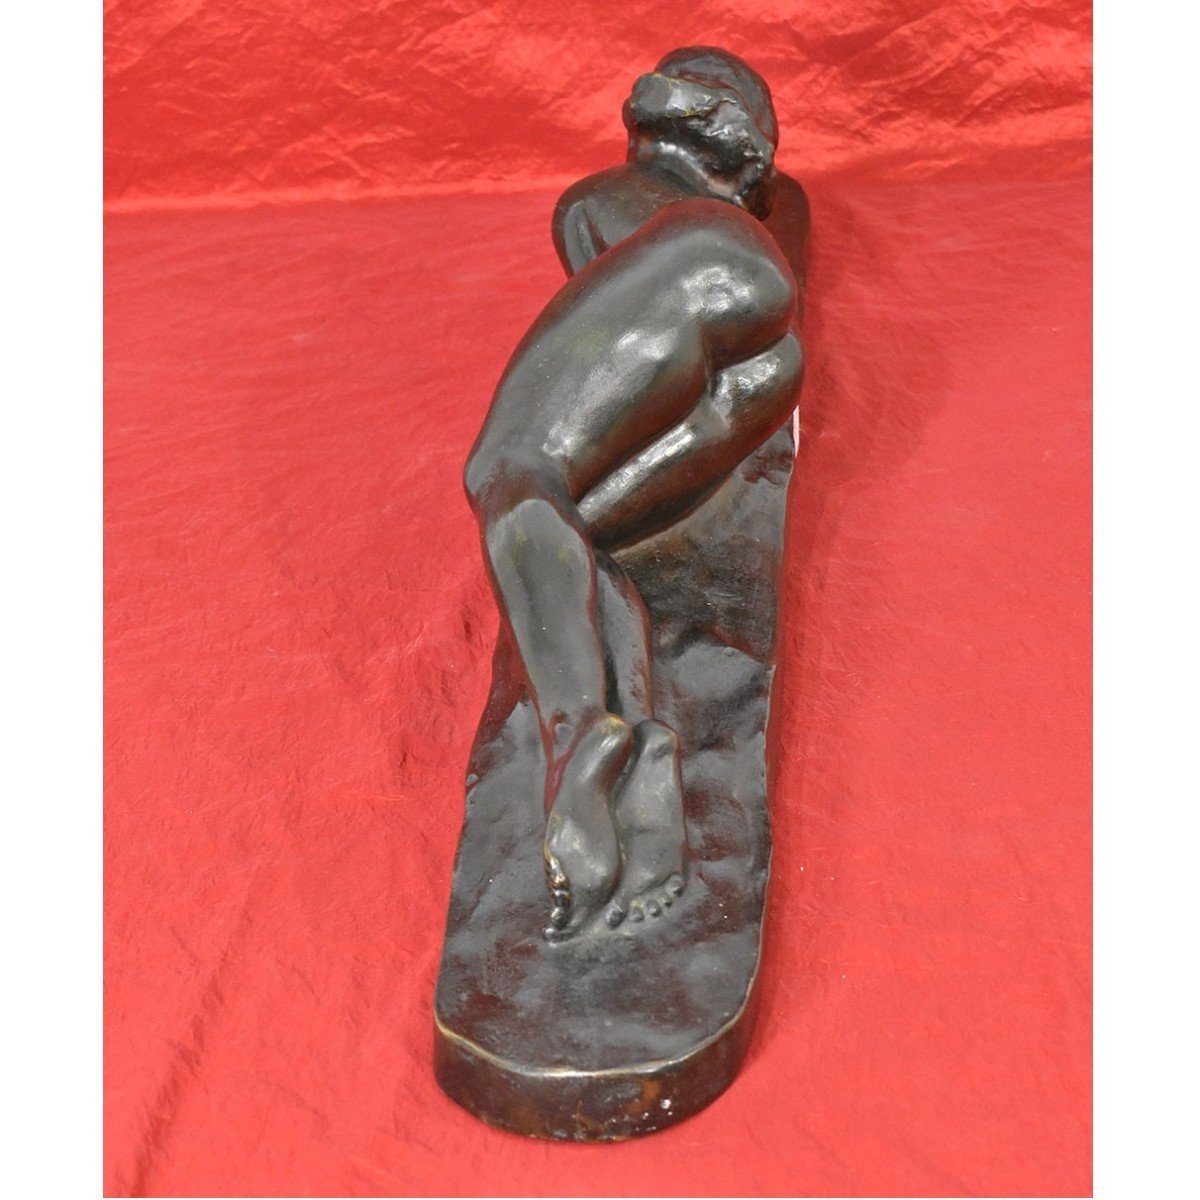 Antique Bronze Statues, Naked Woman, Amedeo Gennarelli, 20th Century, Art Deco. (stb78)-photo-2